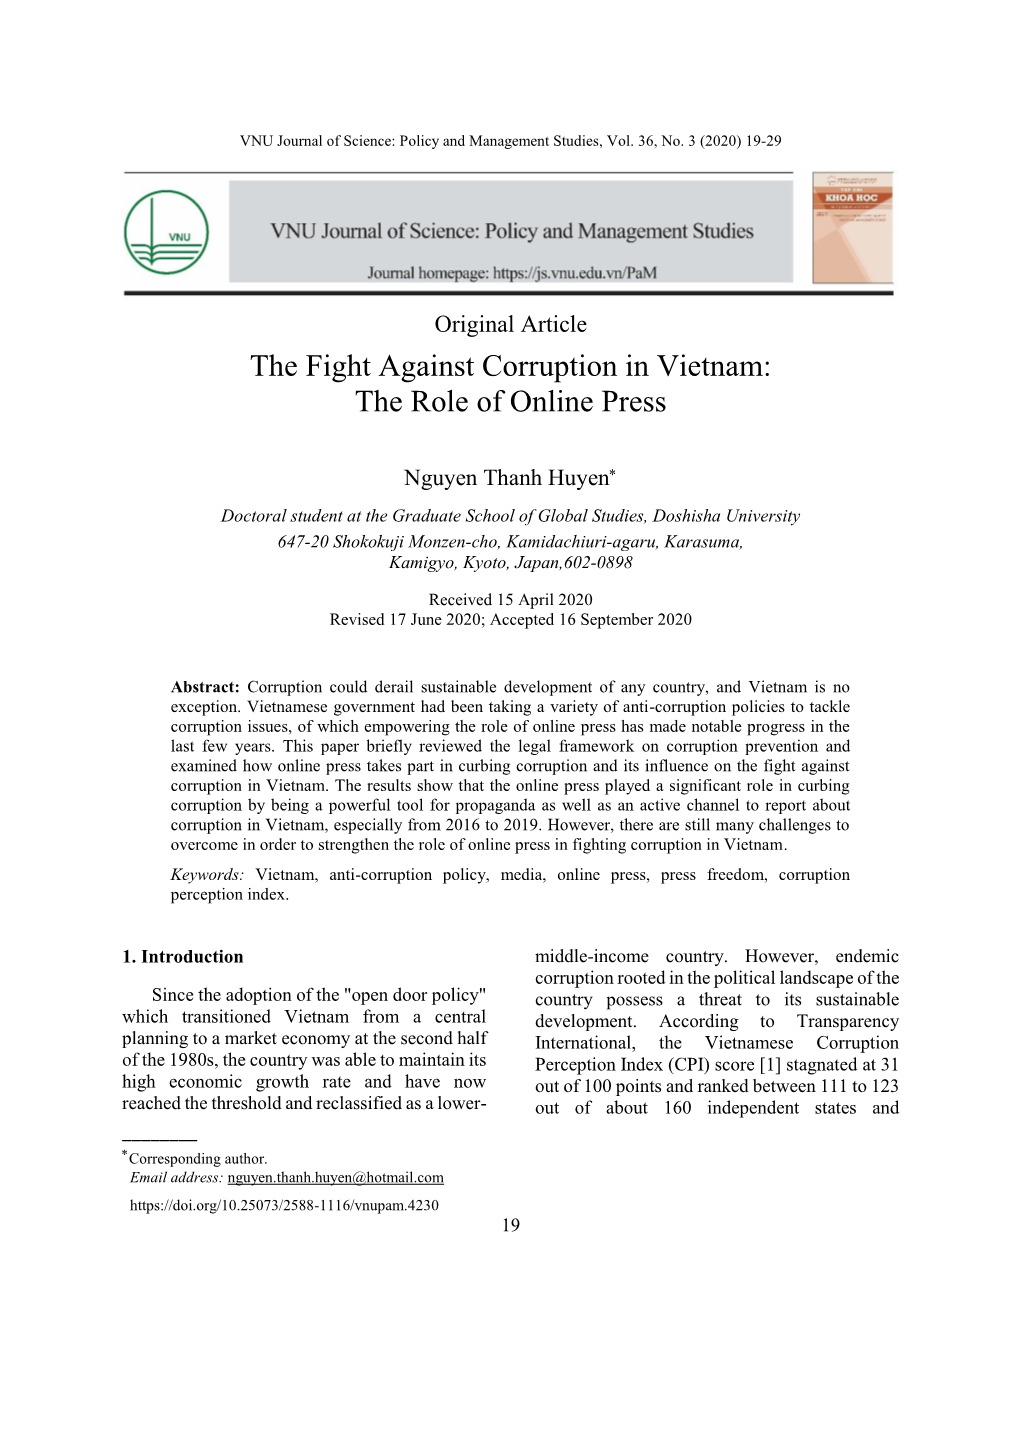 The Fight Against Corruption in Vietnam: the Role of Online Press